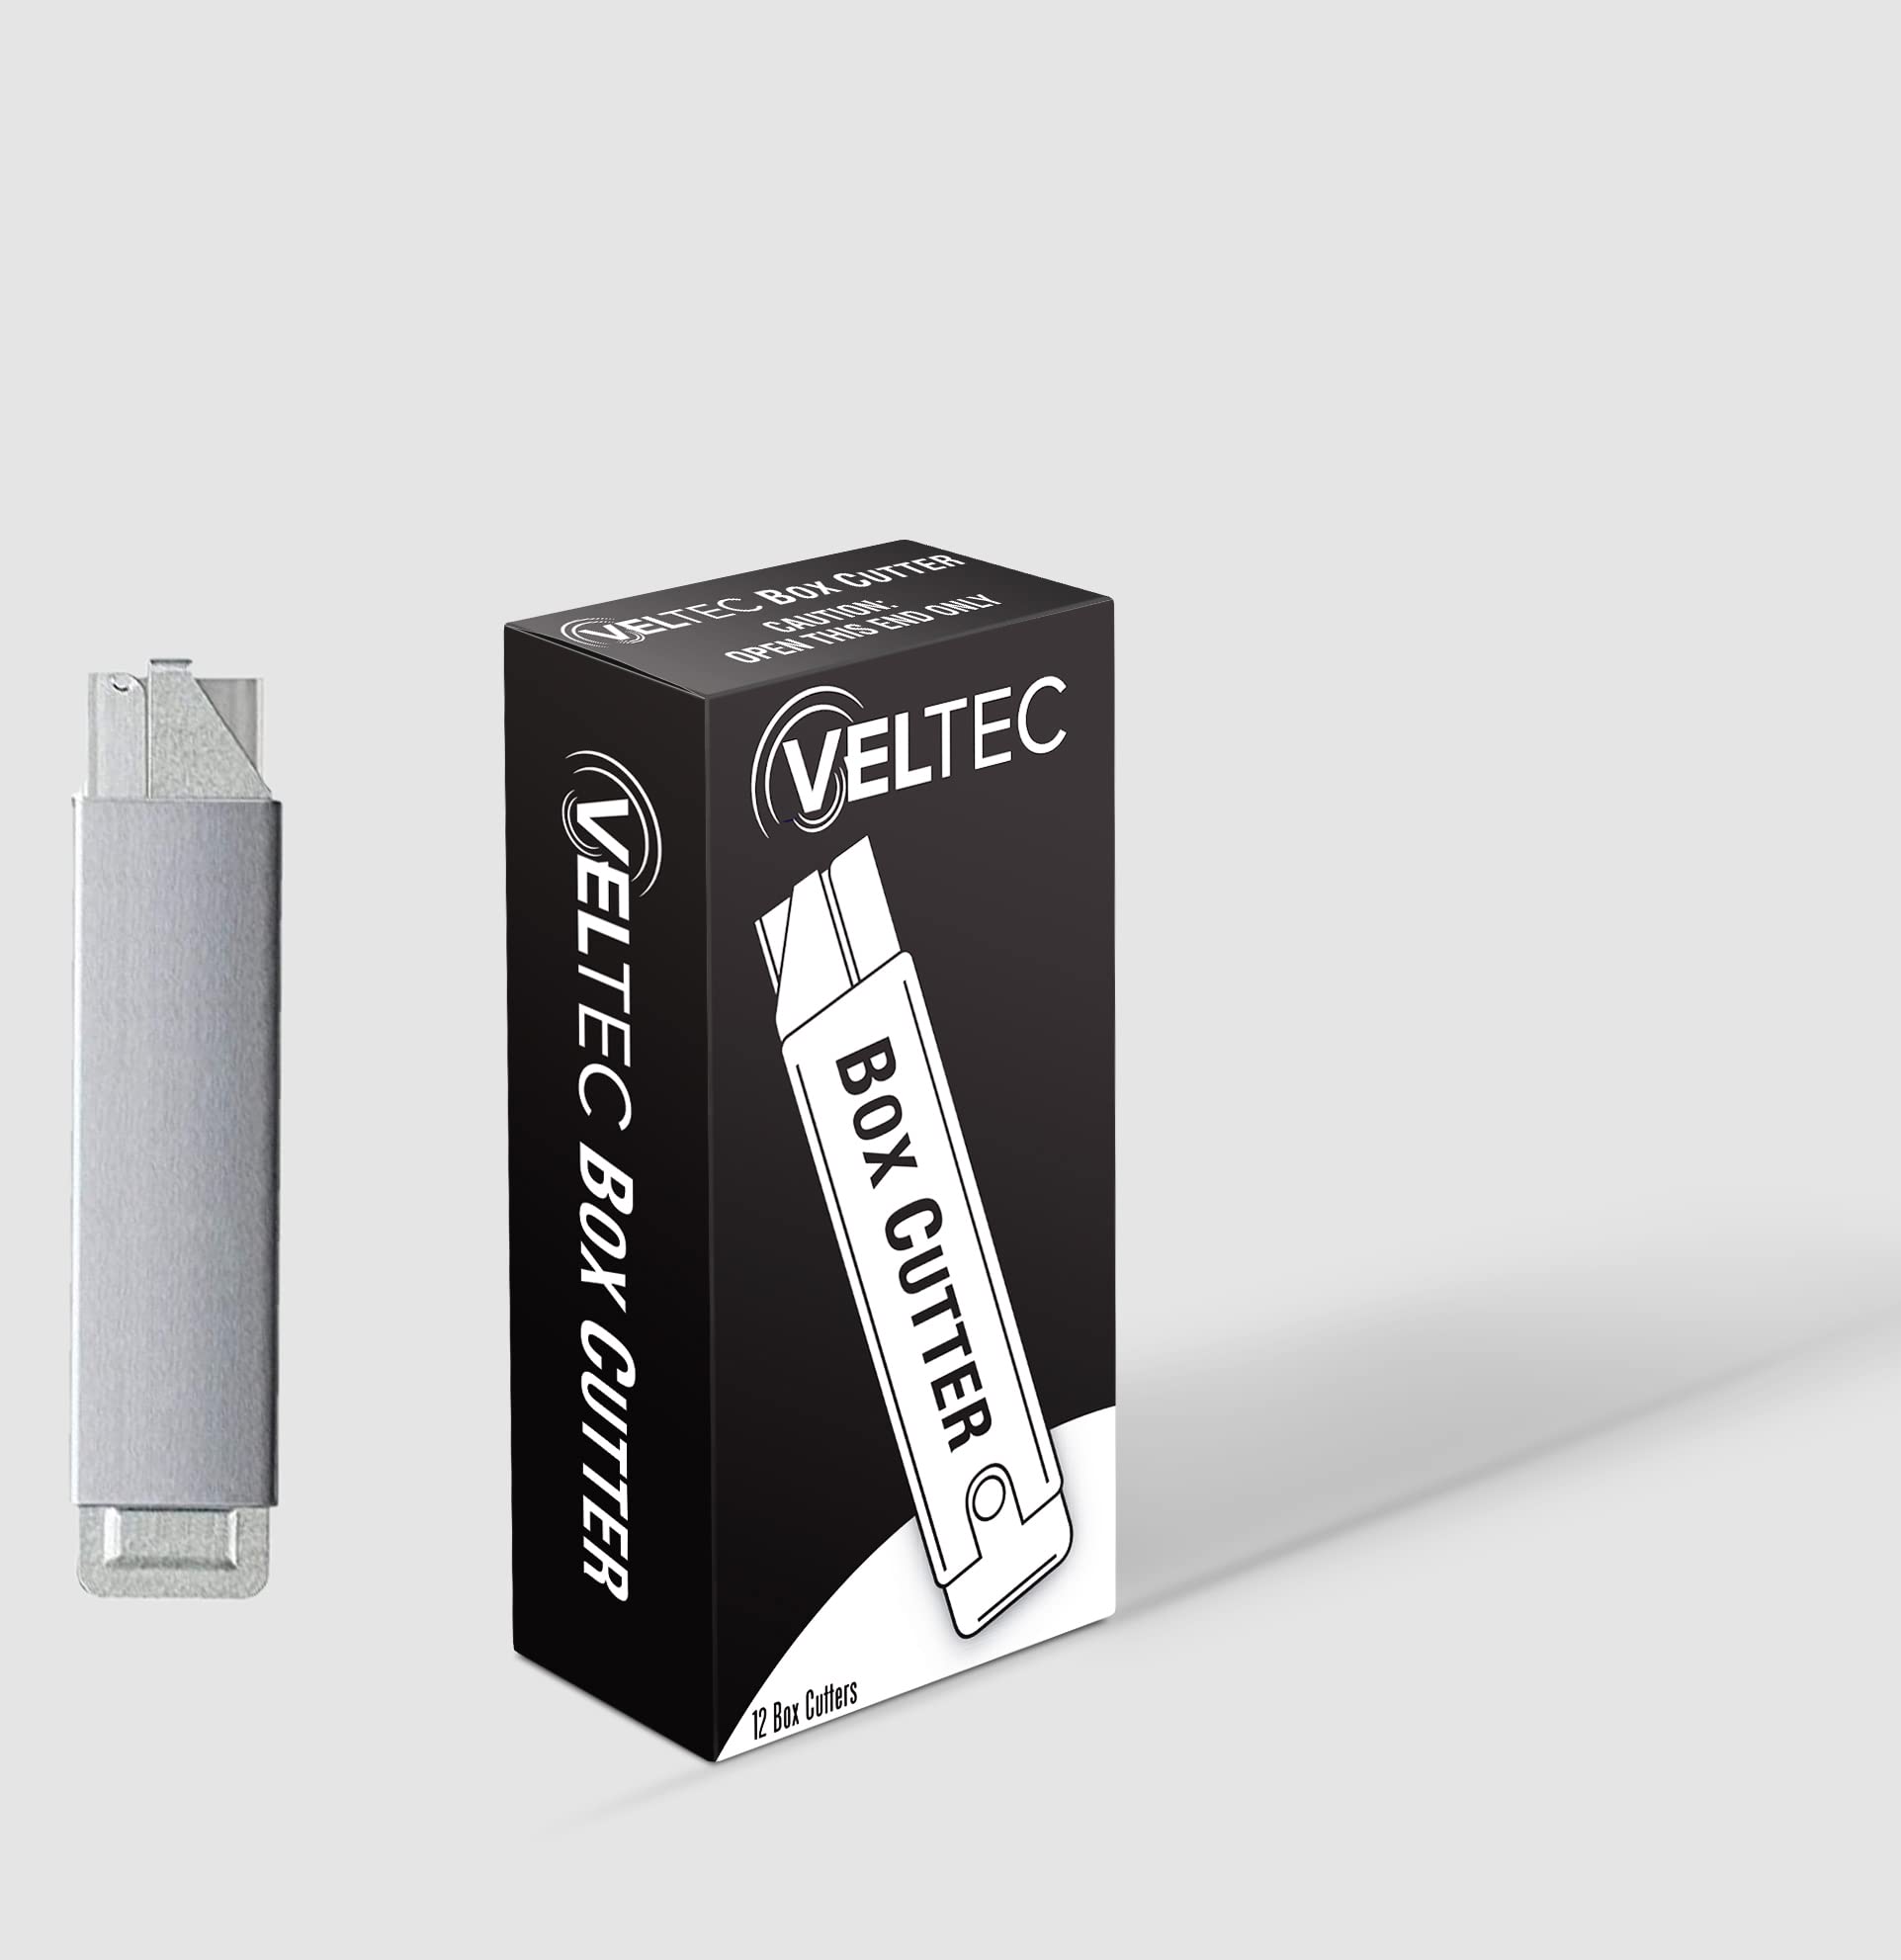 Veltec Standard Box Cutter Retractable Blade Original Utility Knife, for Boxes, Papers, Cardboards, Packages, Tape, Metal Body (Pack of 12)